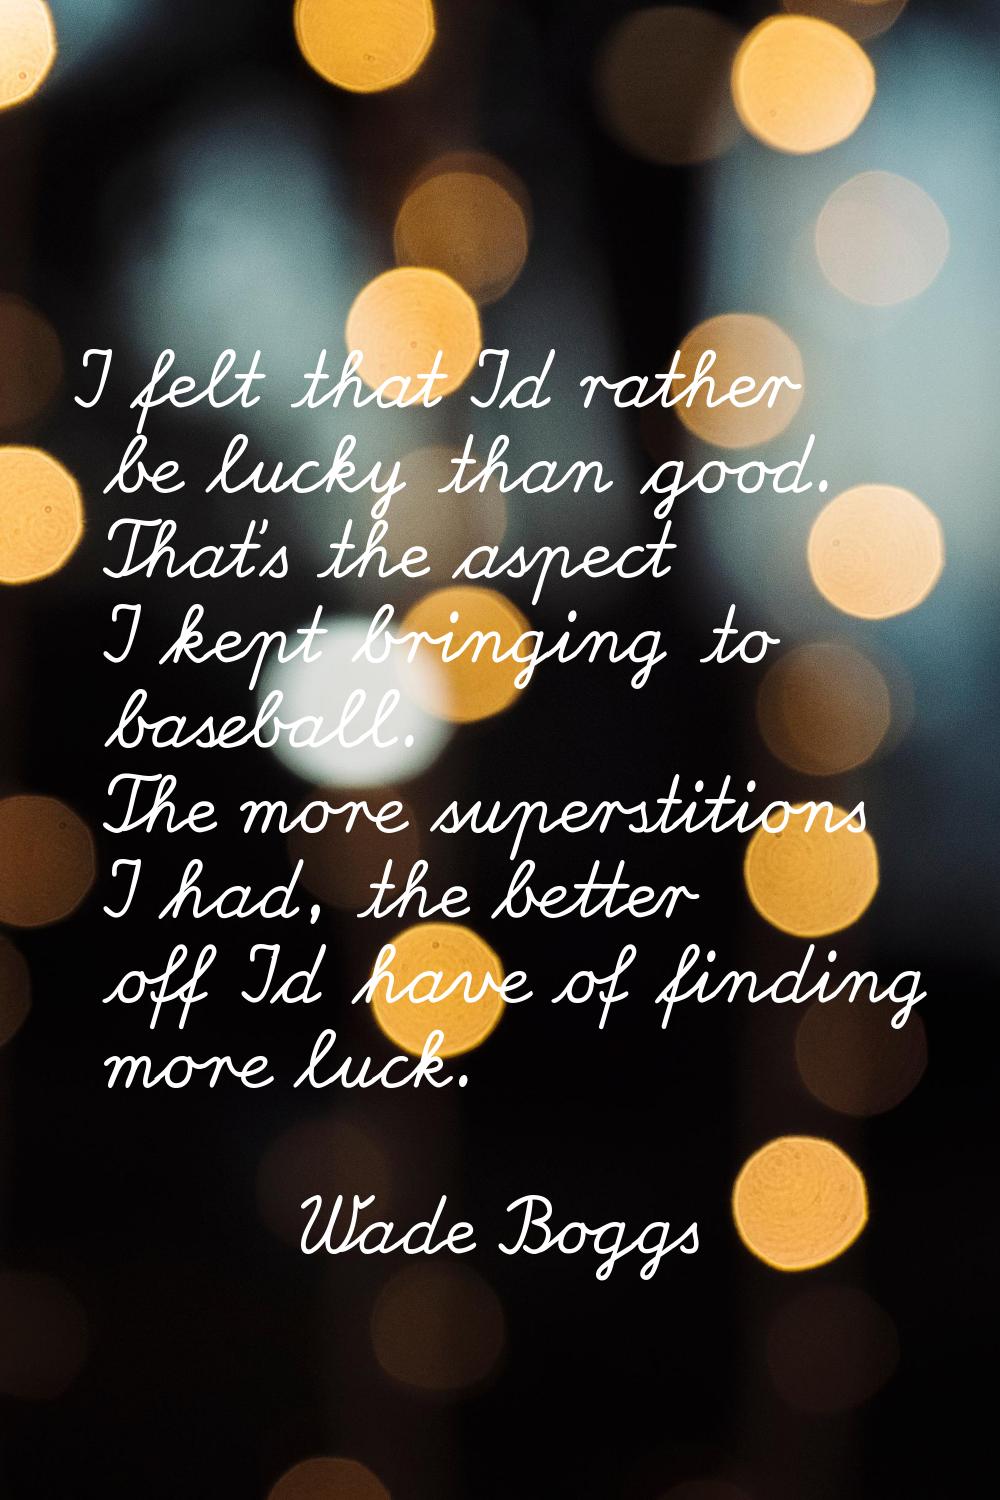 I felt that I'd rather be lucky than good. That's the aspect I kept bringing to baseball. The more 